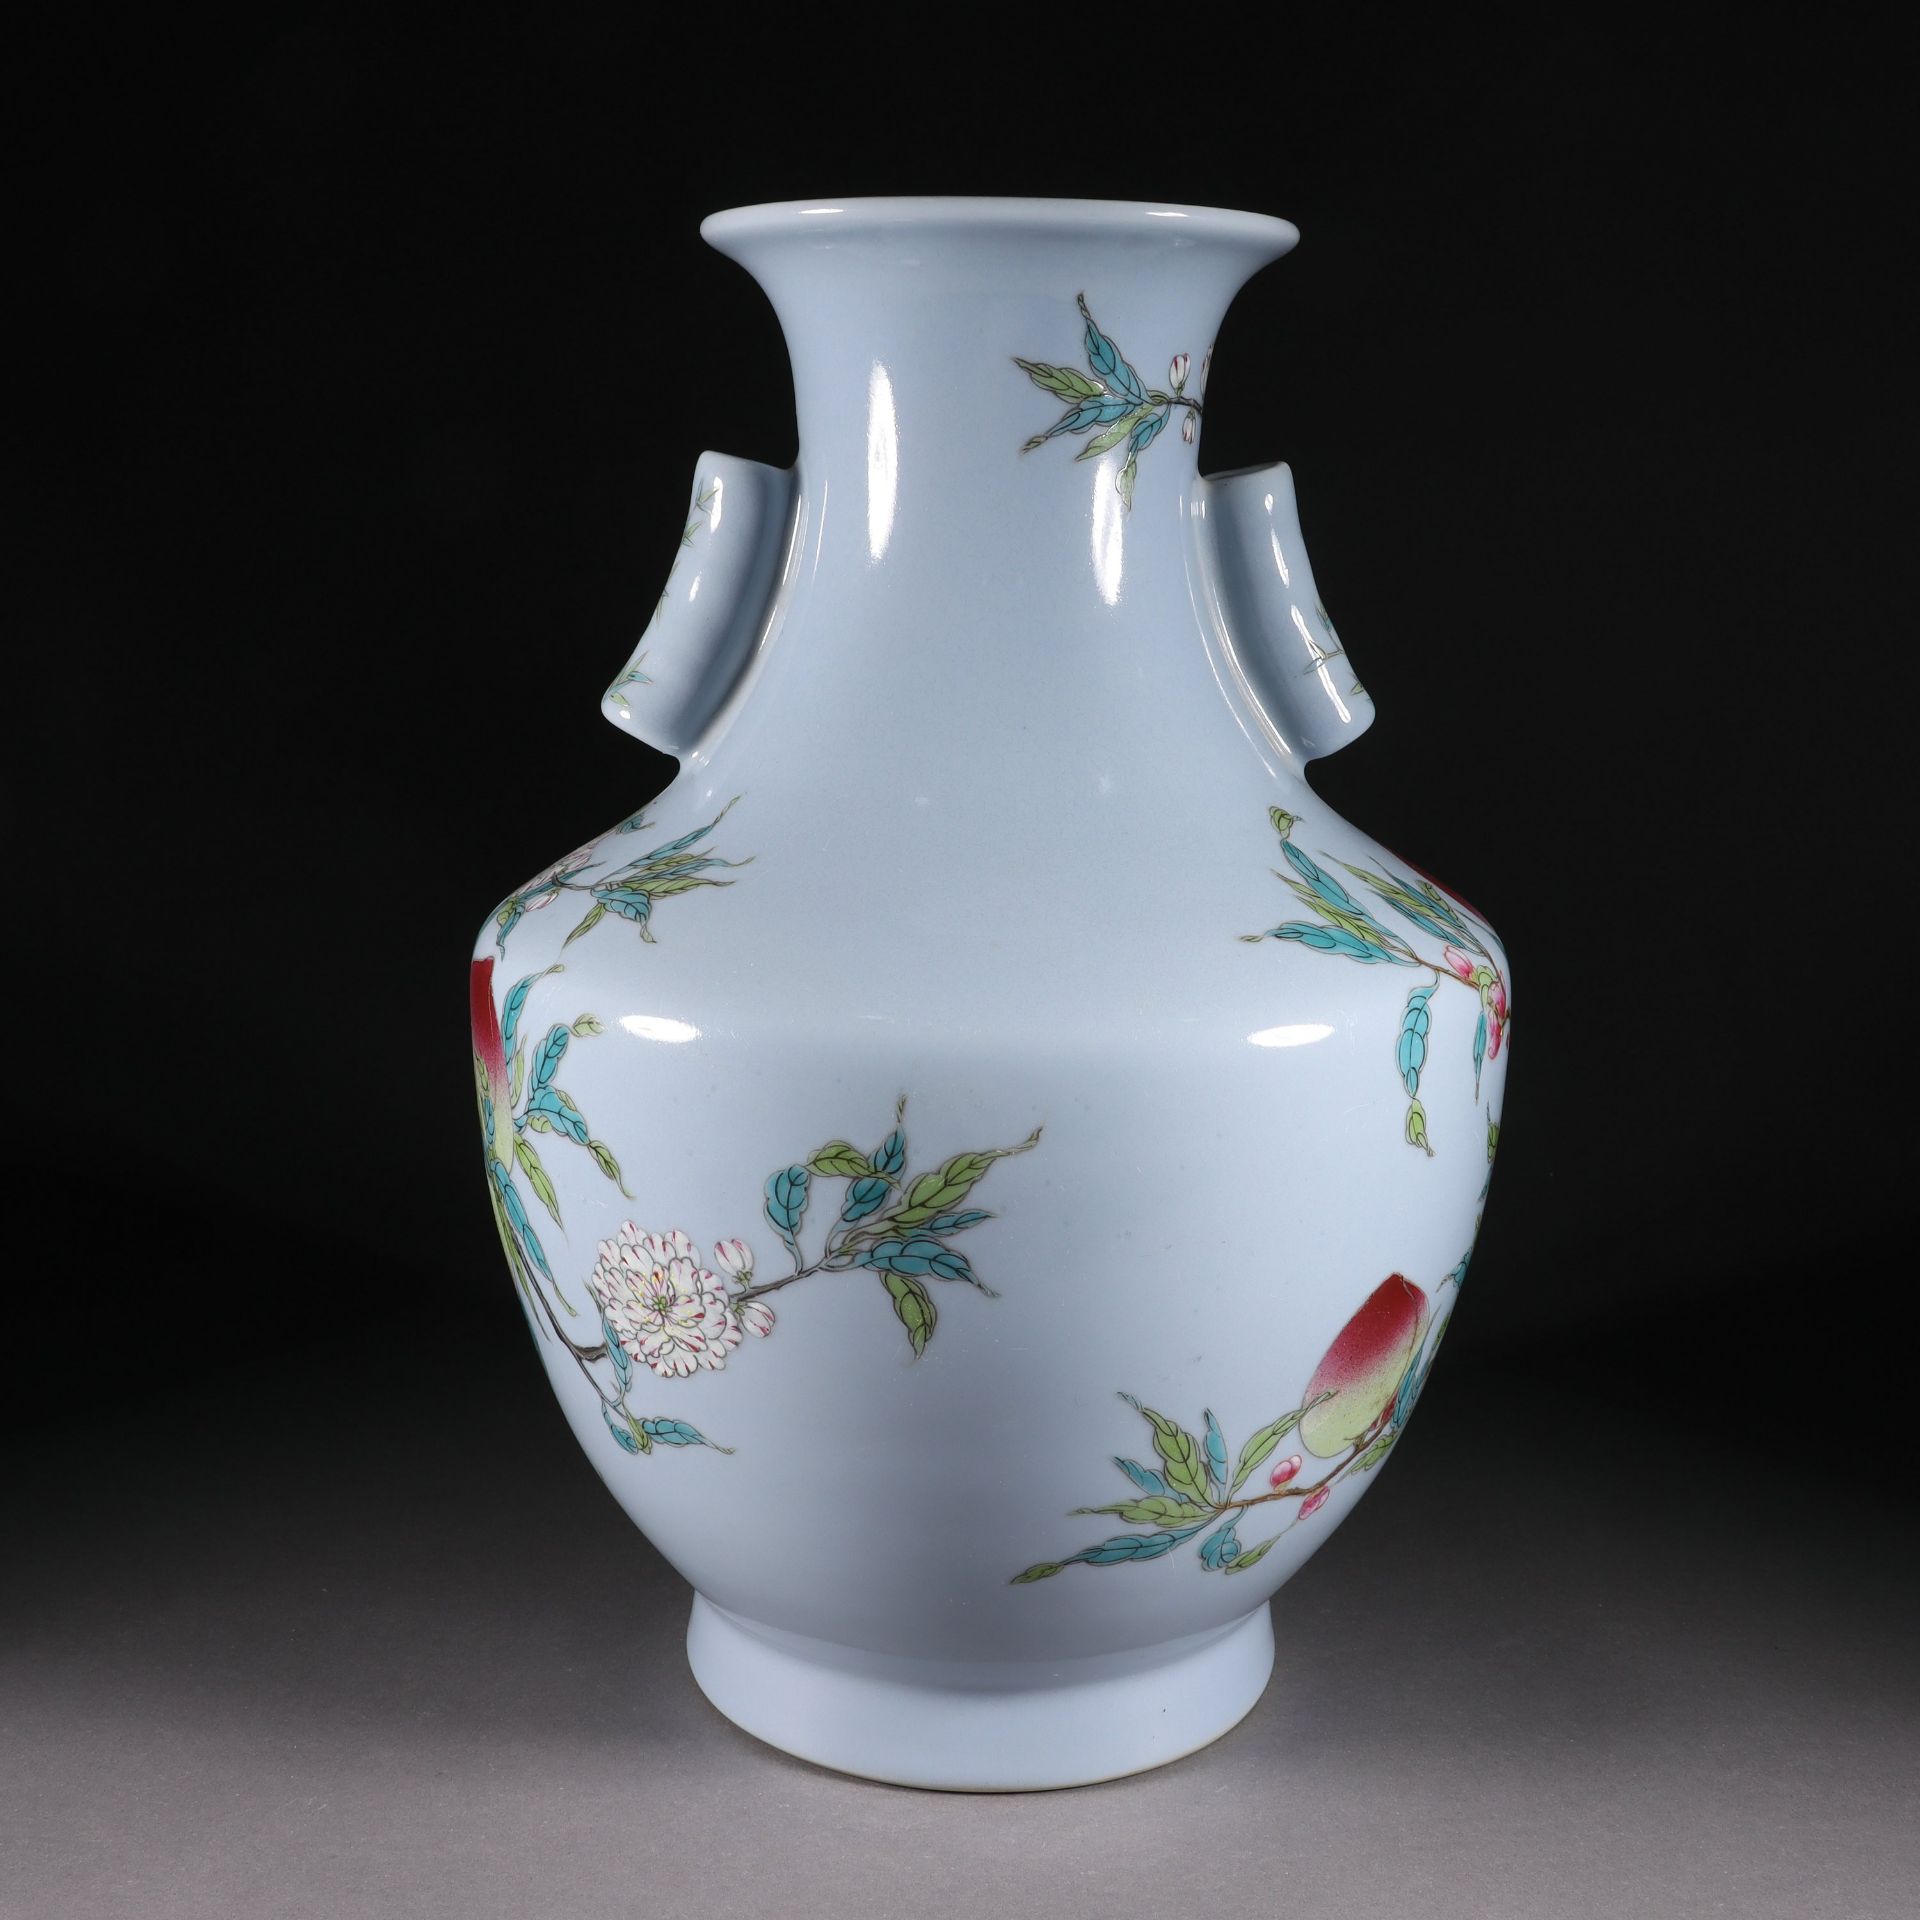 Pastel nine peach amphora from the Qing dynasty - Image 5 of 9